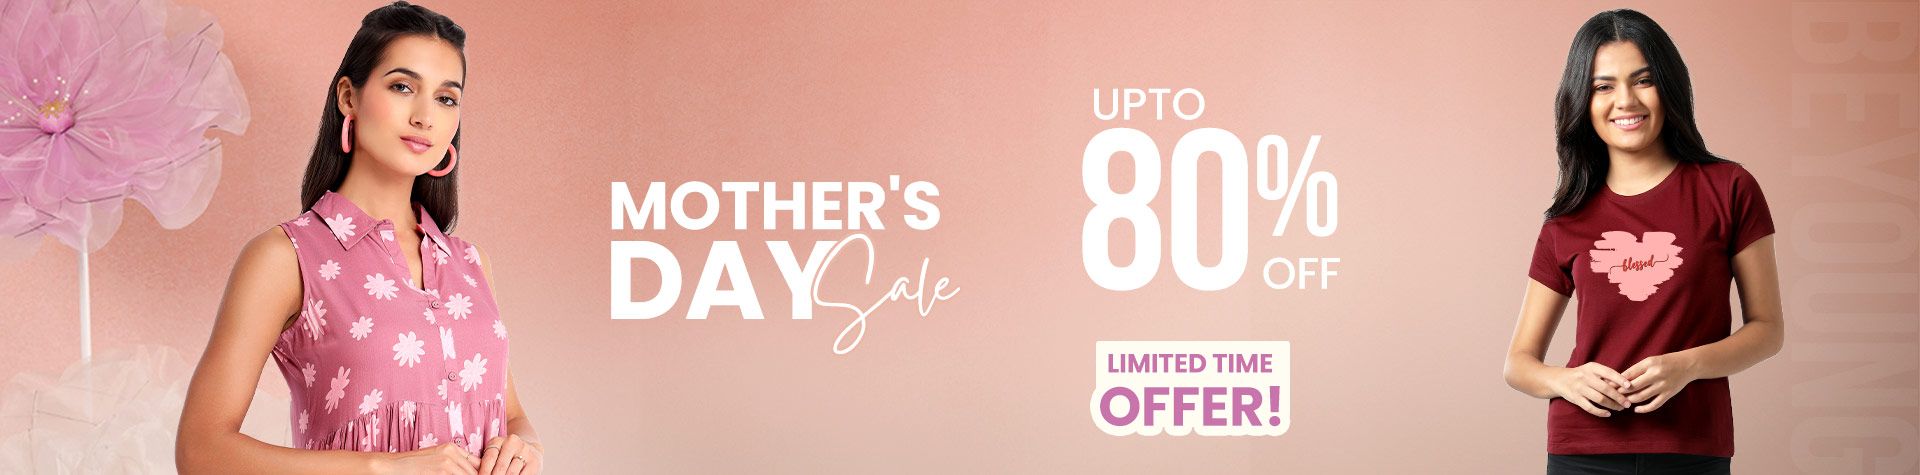 Mothers Day Sale Offers